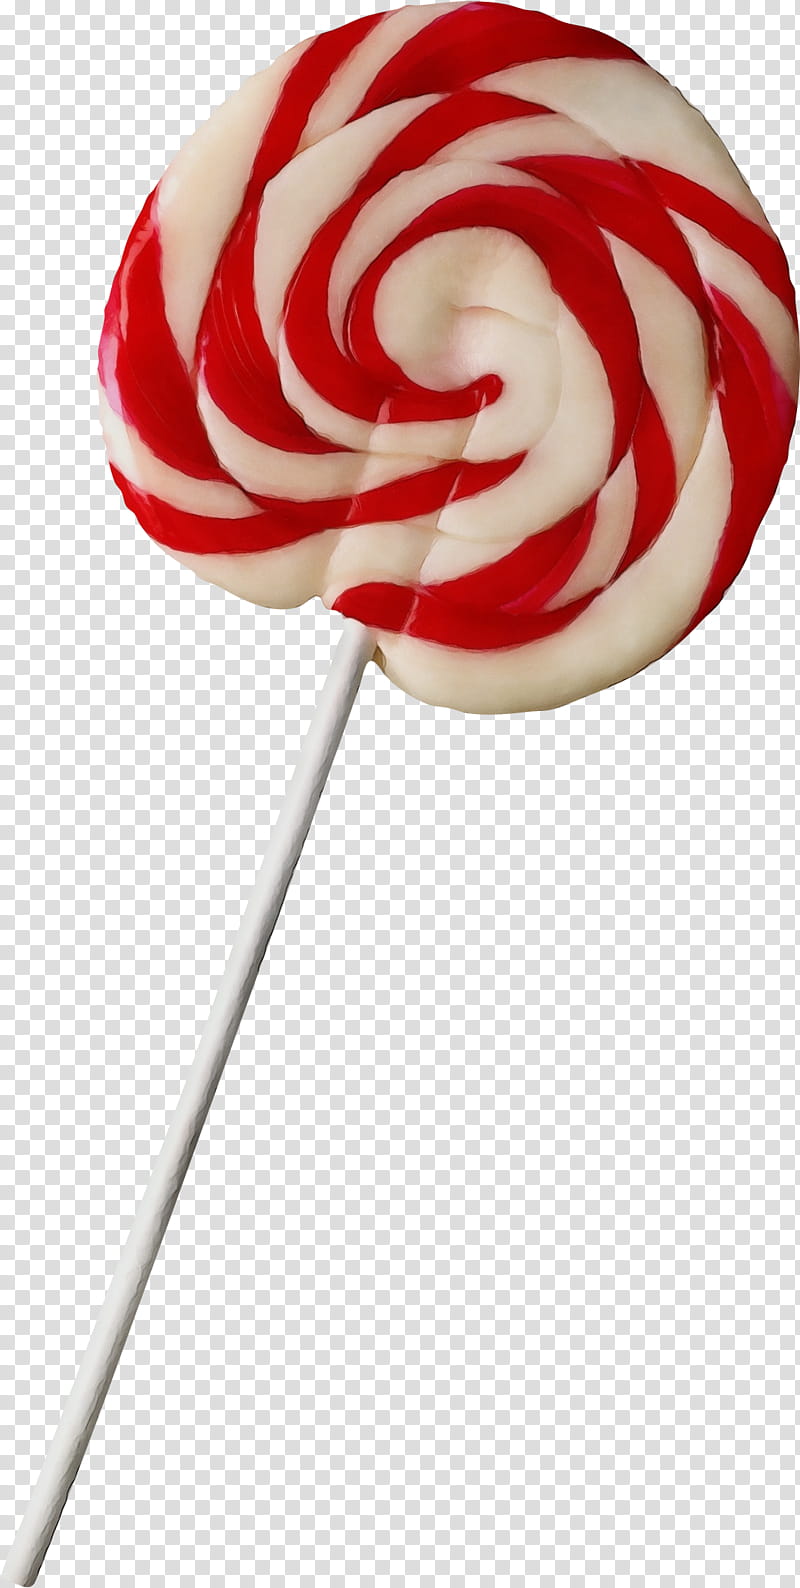 Lollipop, Watercolor, Paint, Wet Ink, Candy, Stick Candy, Candy Apple, Gummy Candy transparent background PNG clipart